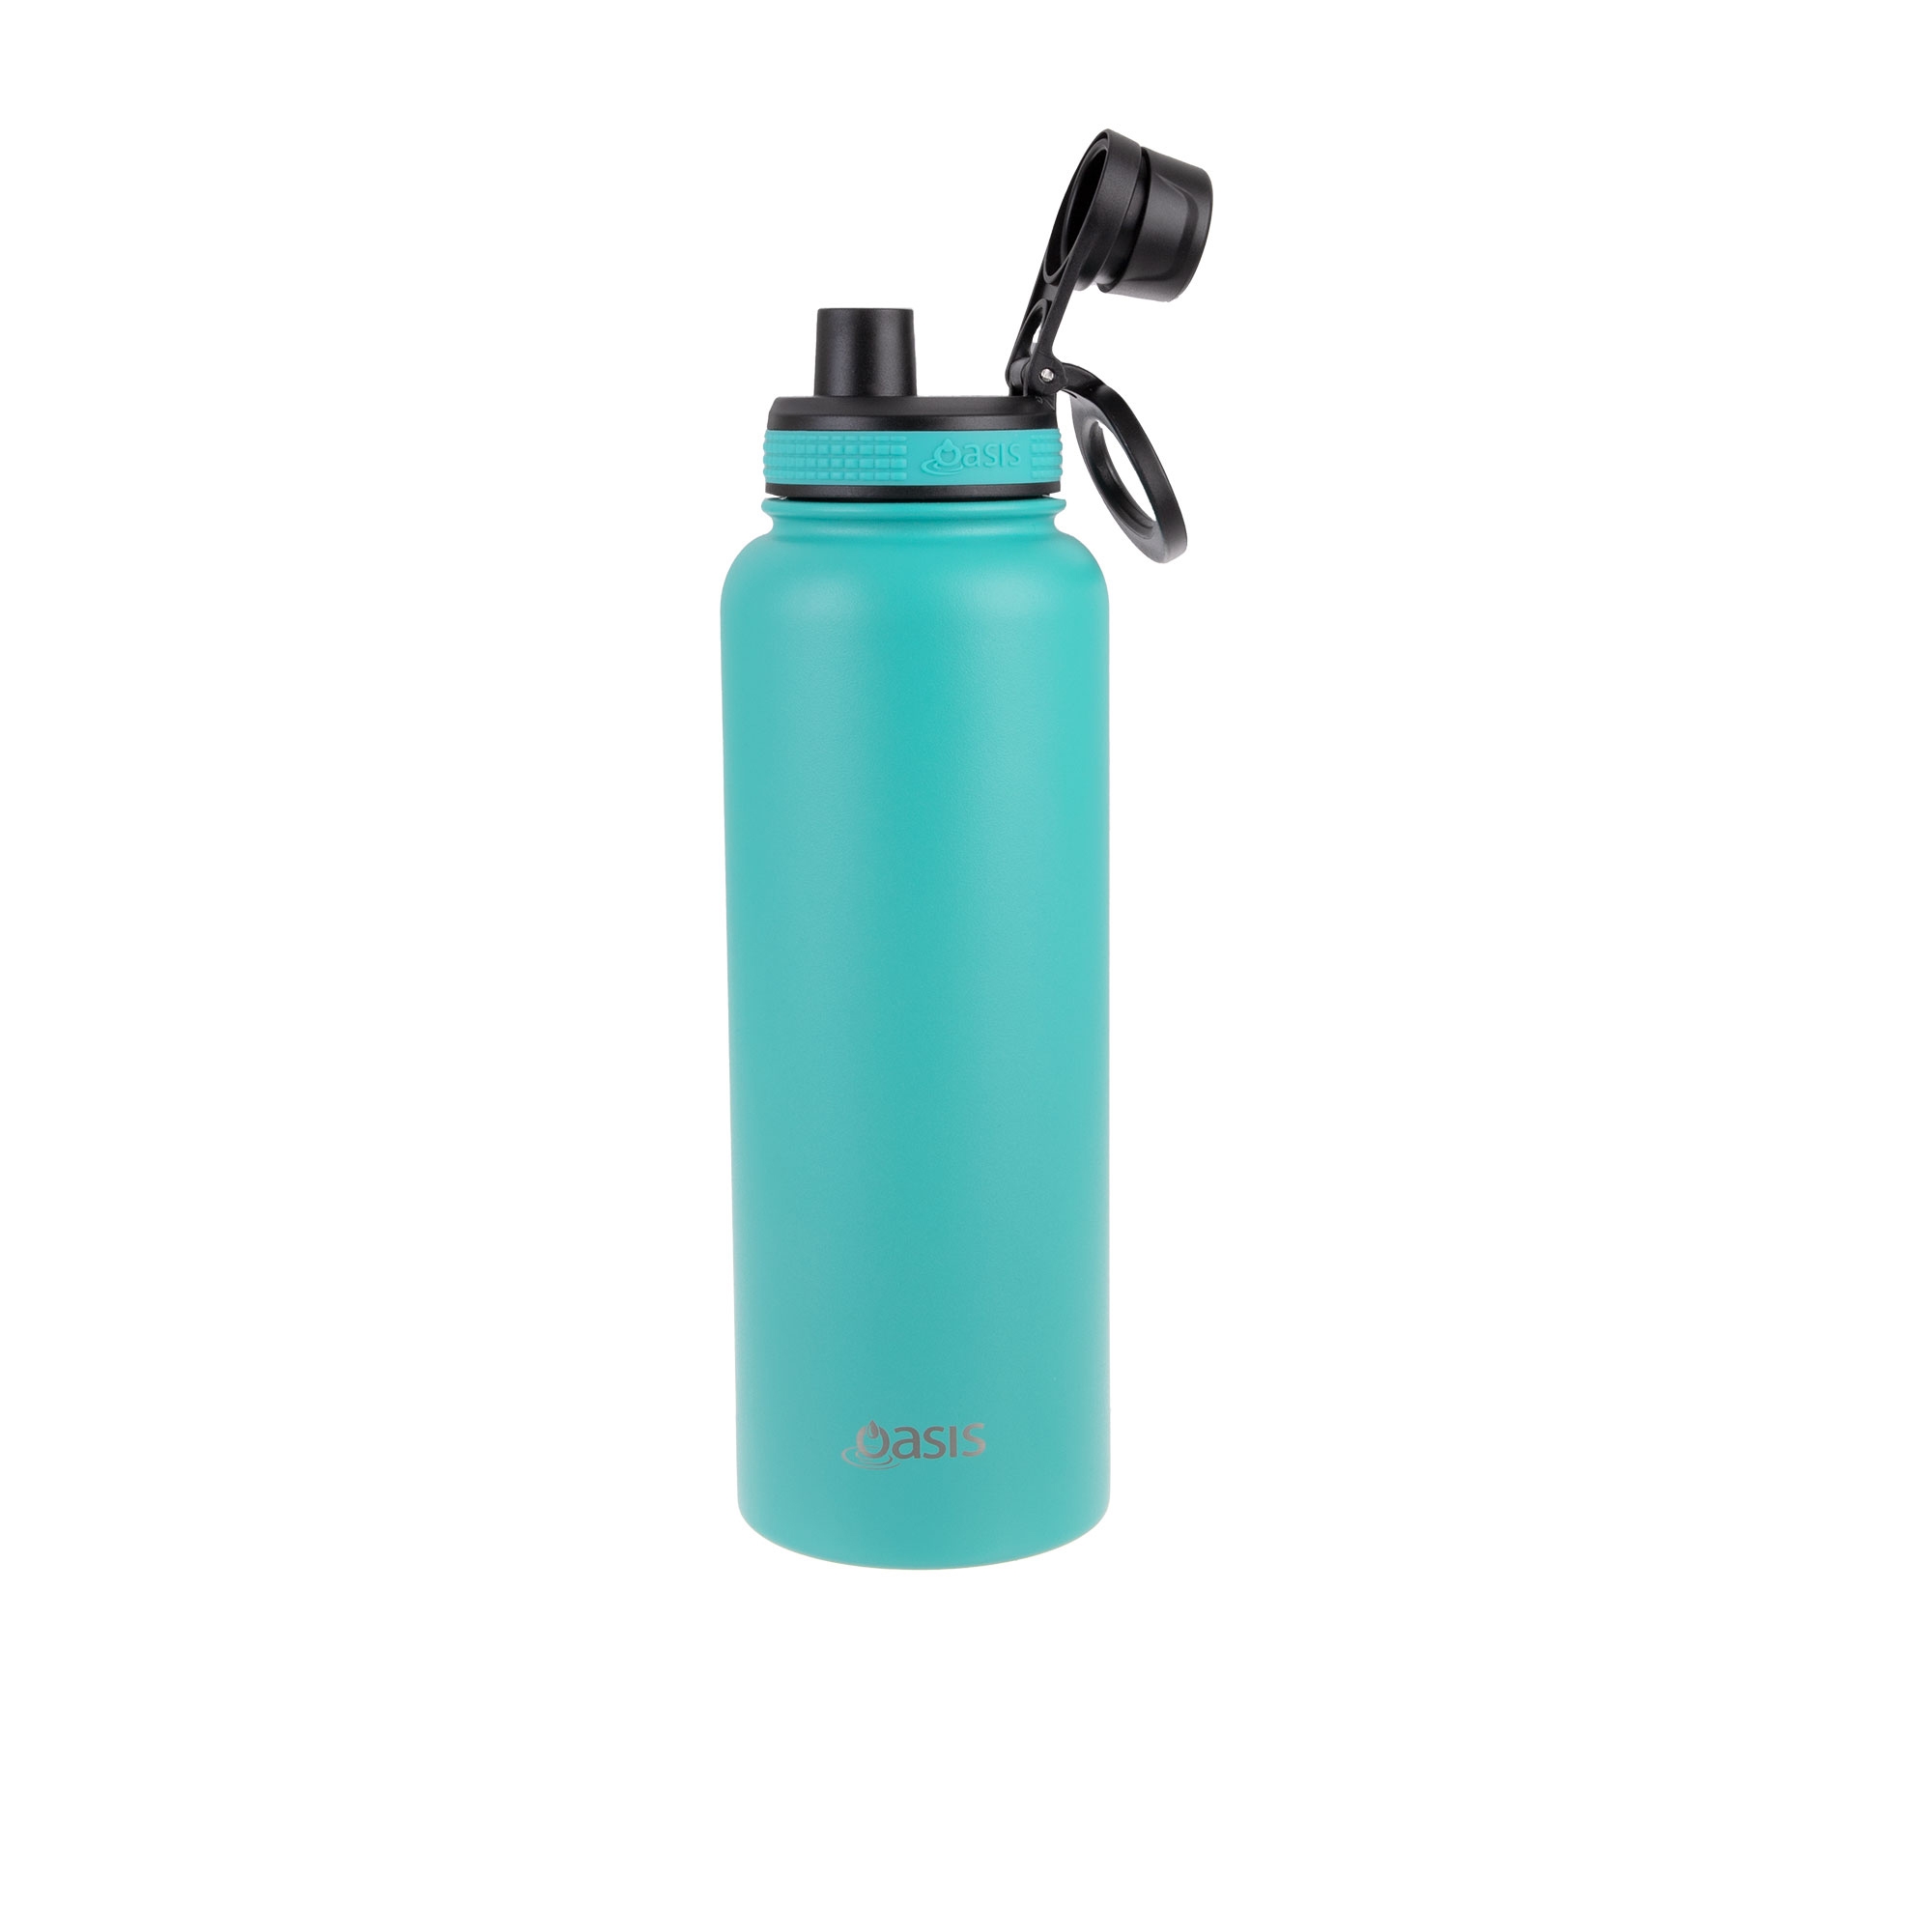 Oasis Challenger Double Wall Insulated Sports Bottle 1.1L Turquoise Image 2